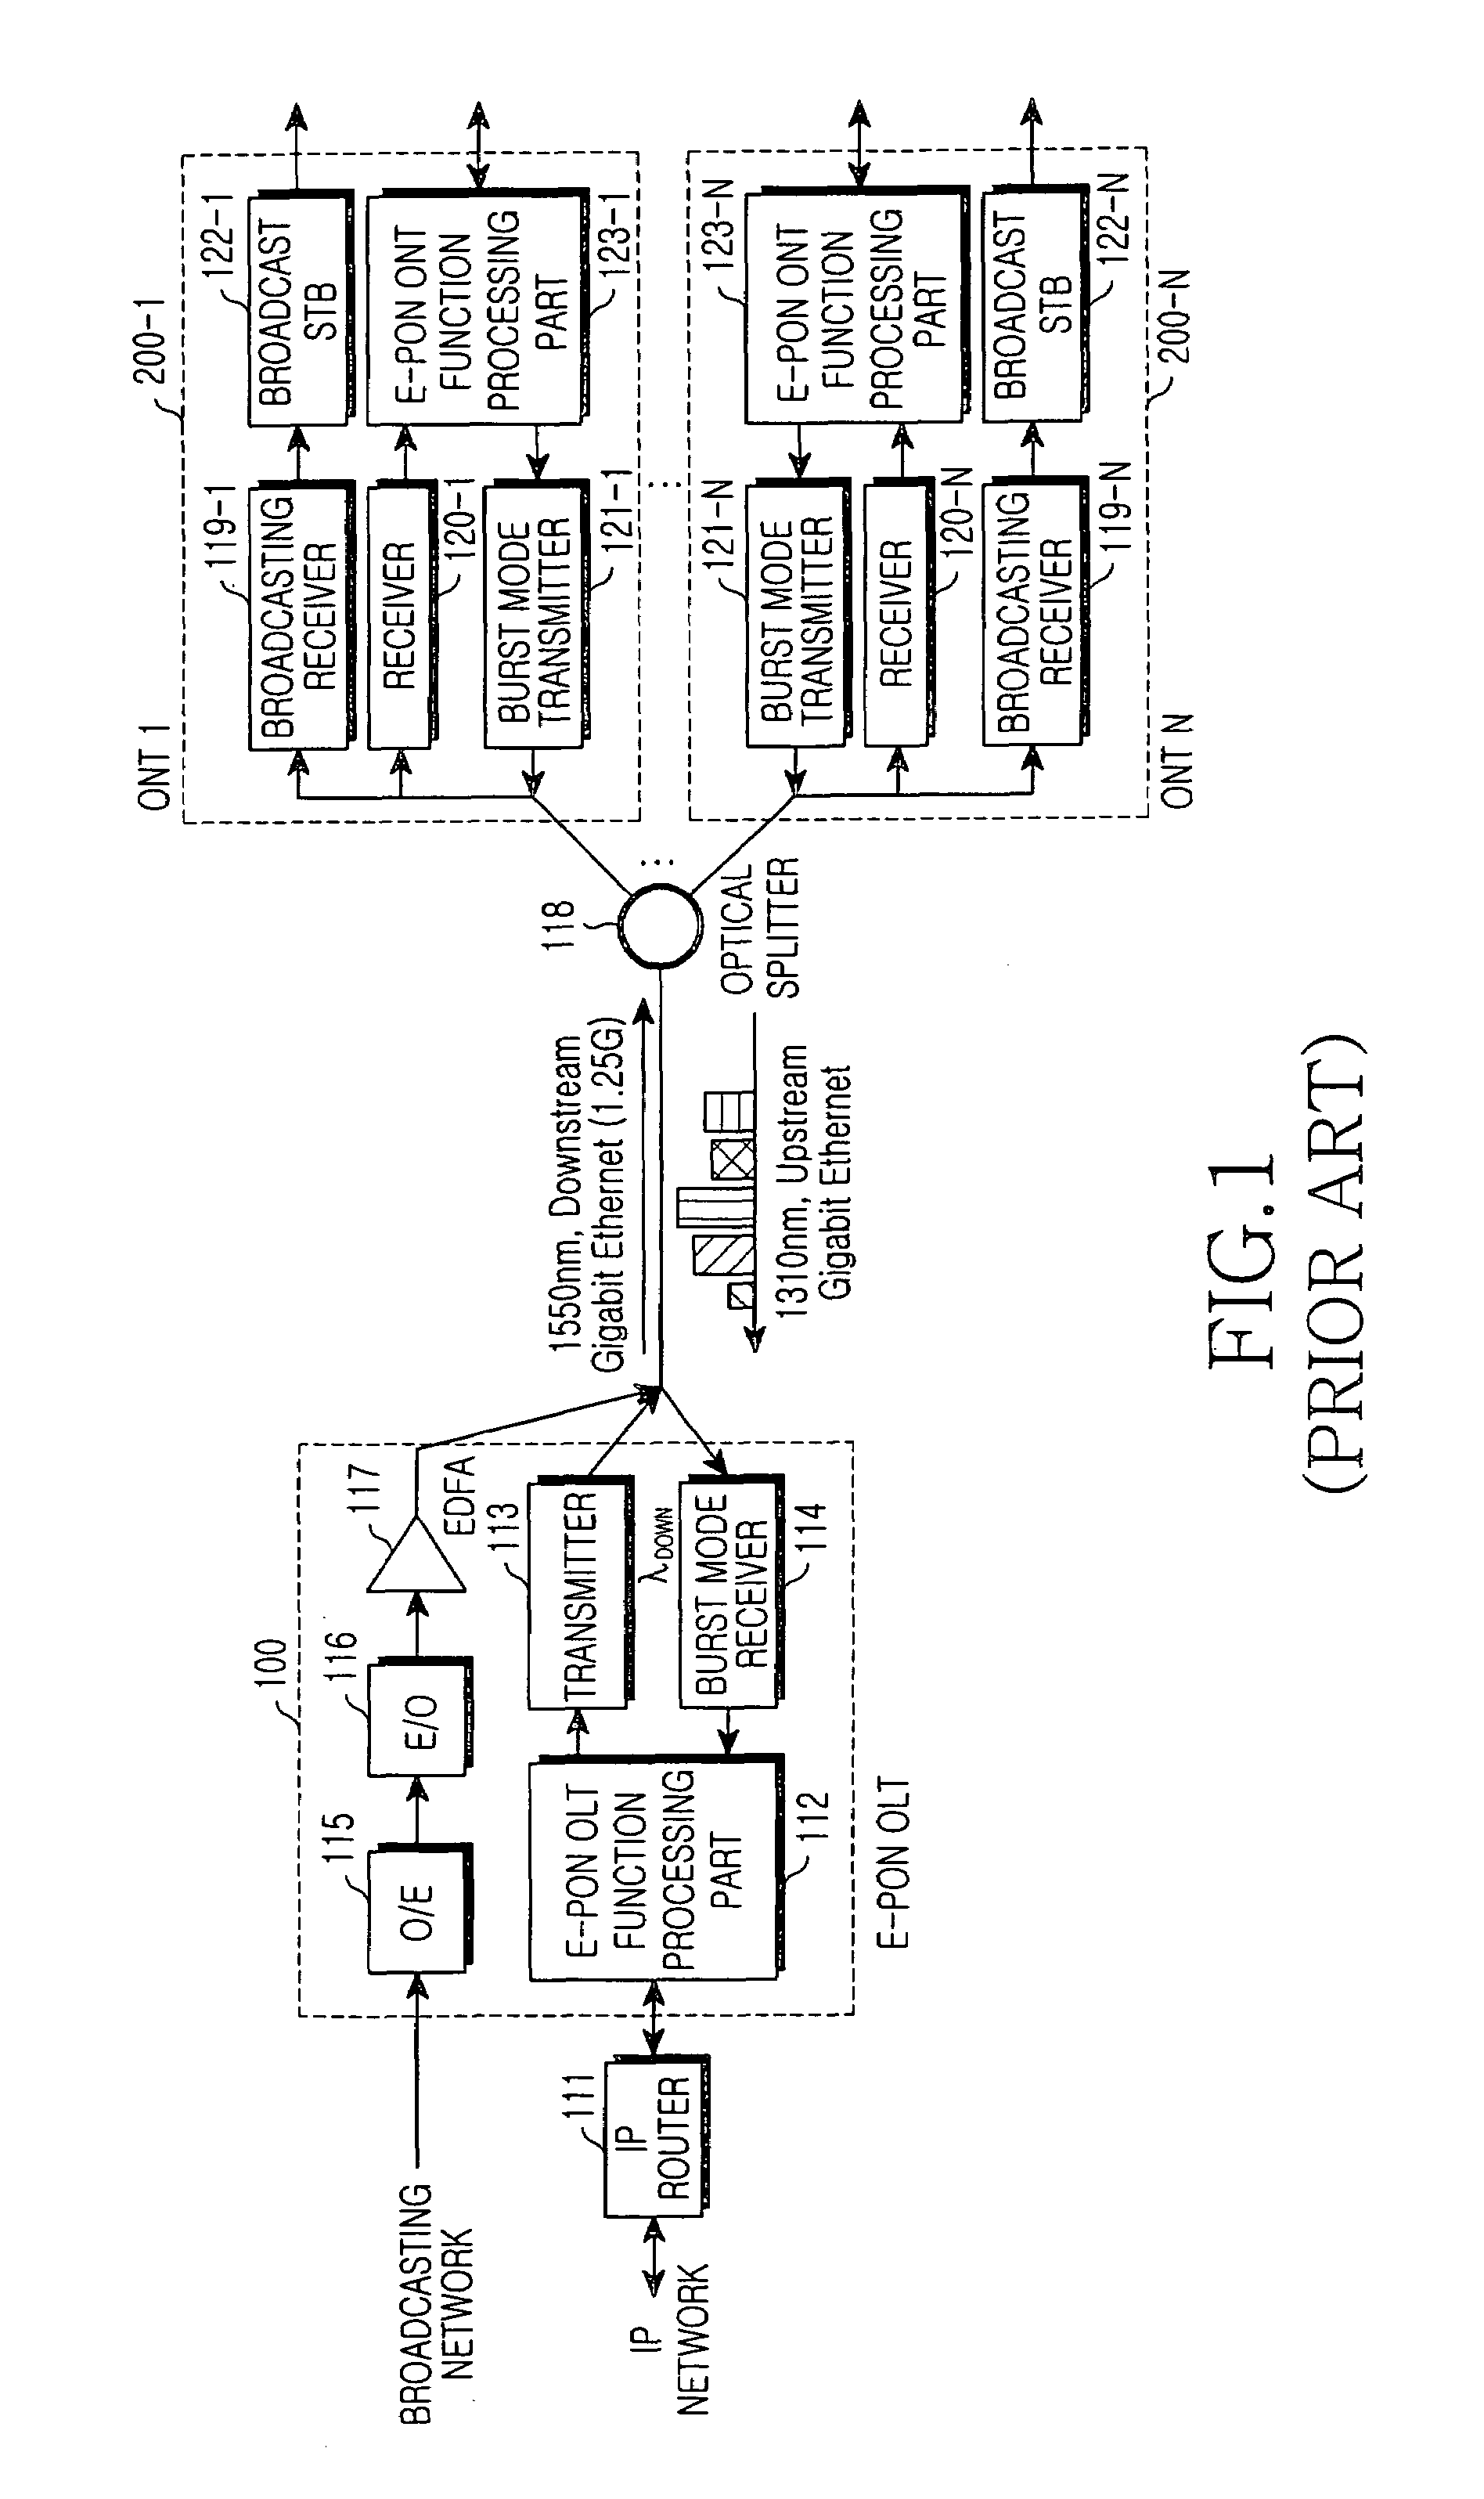 Ethernet PON using time division multiplexing to converge broadcasting/video with data